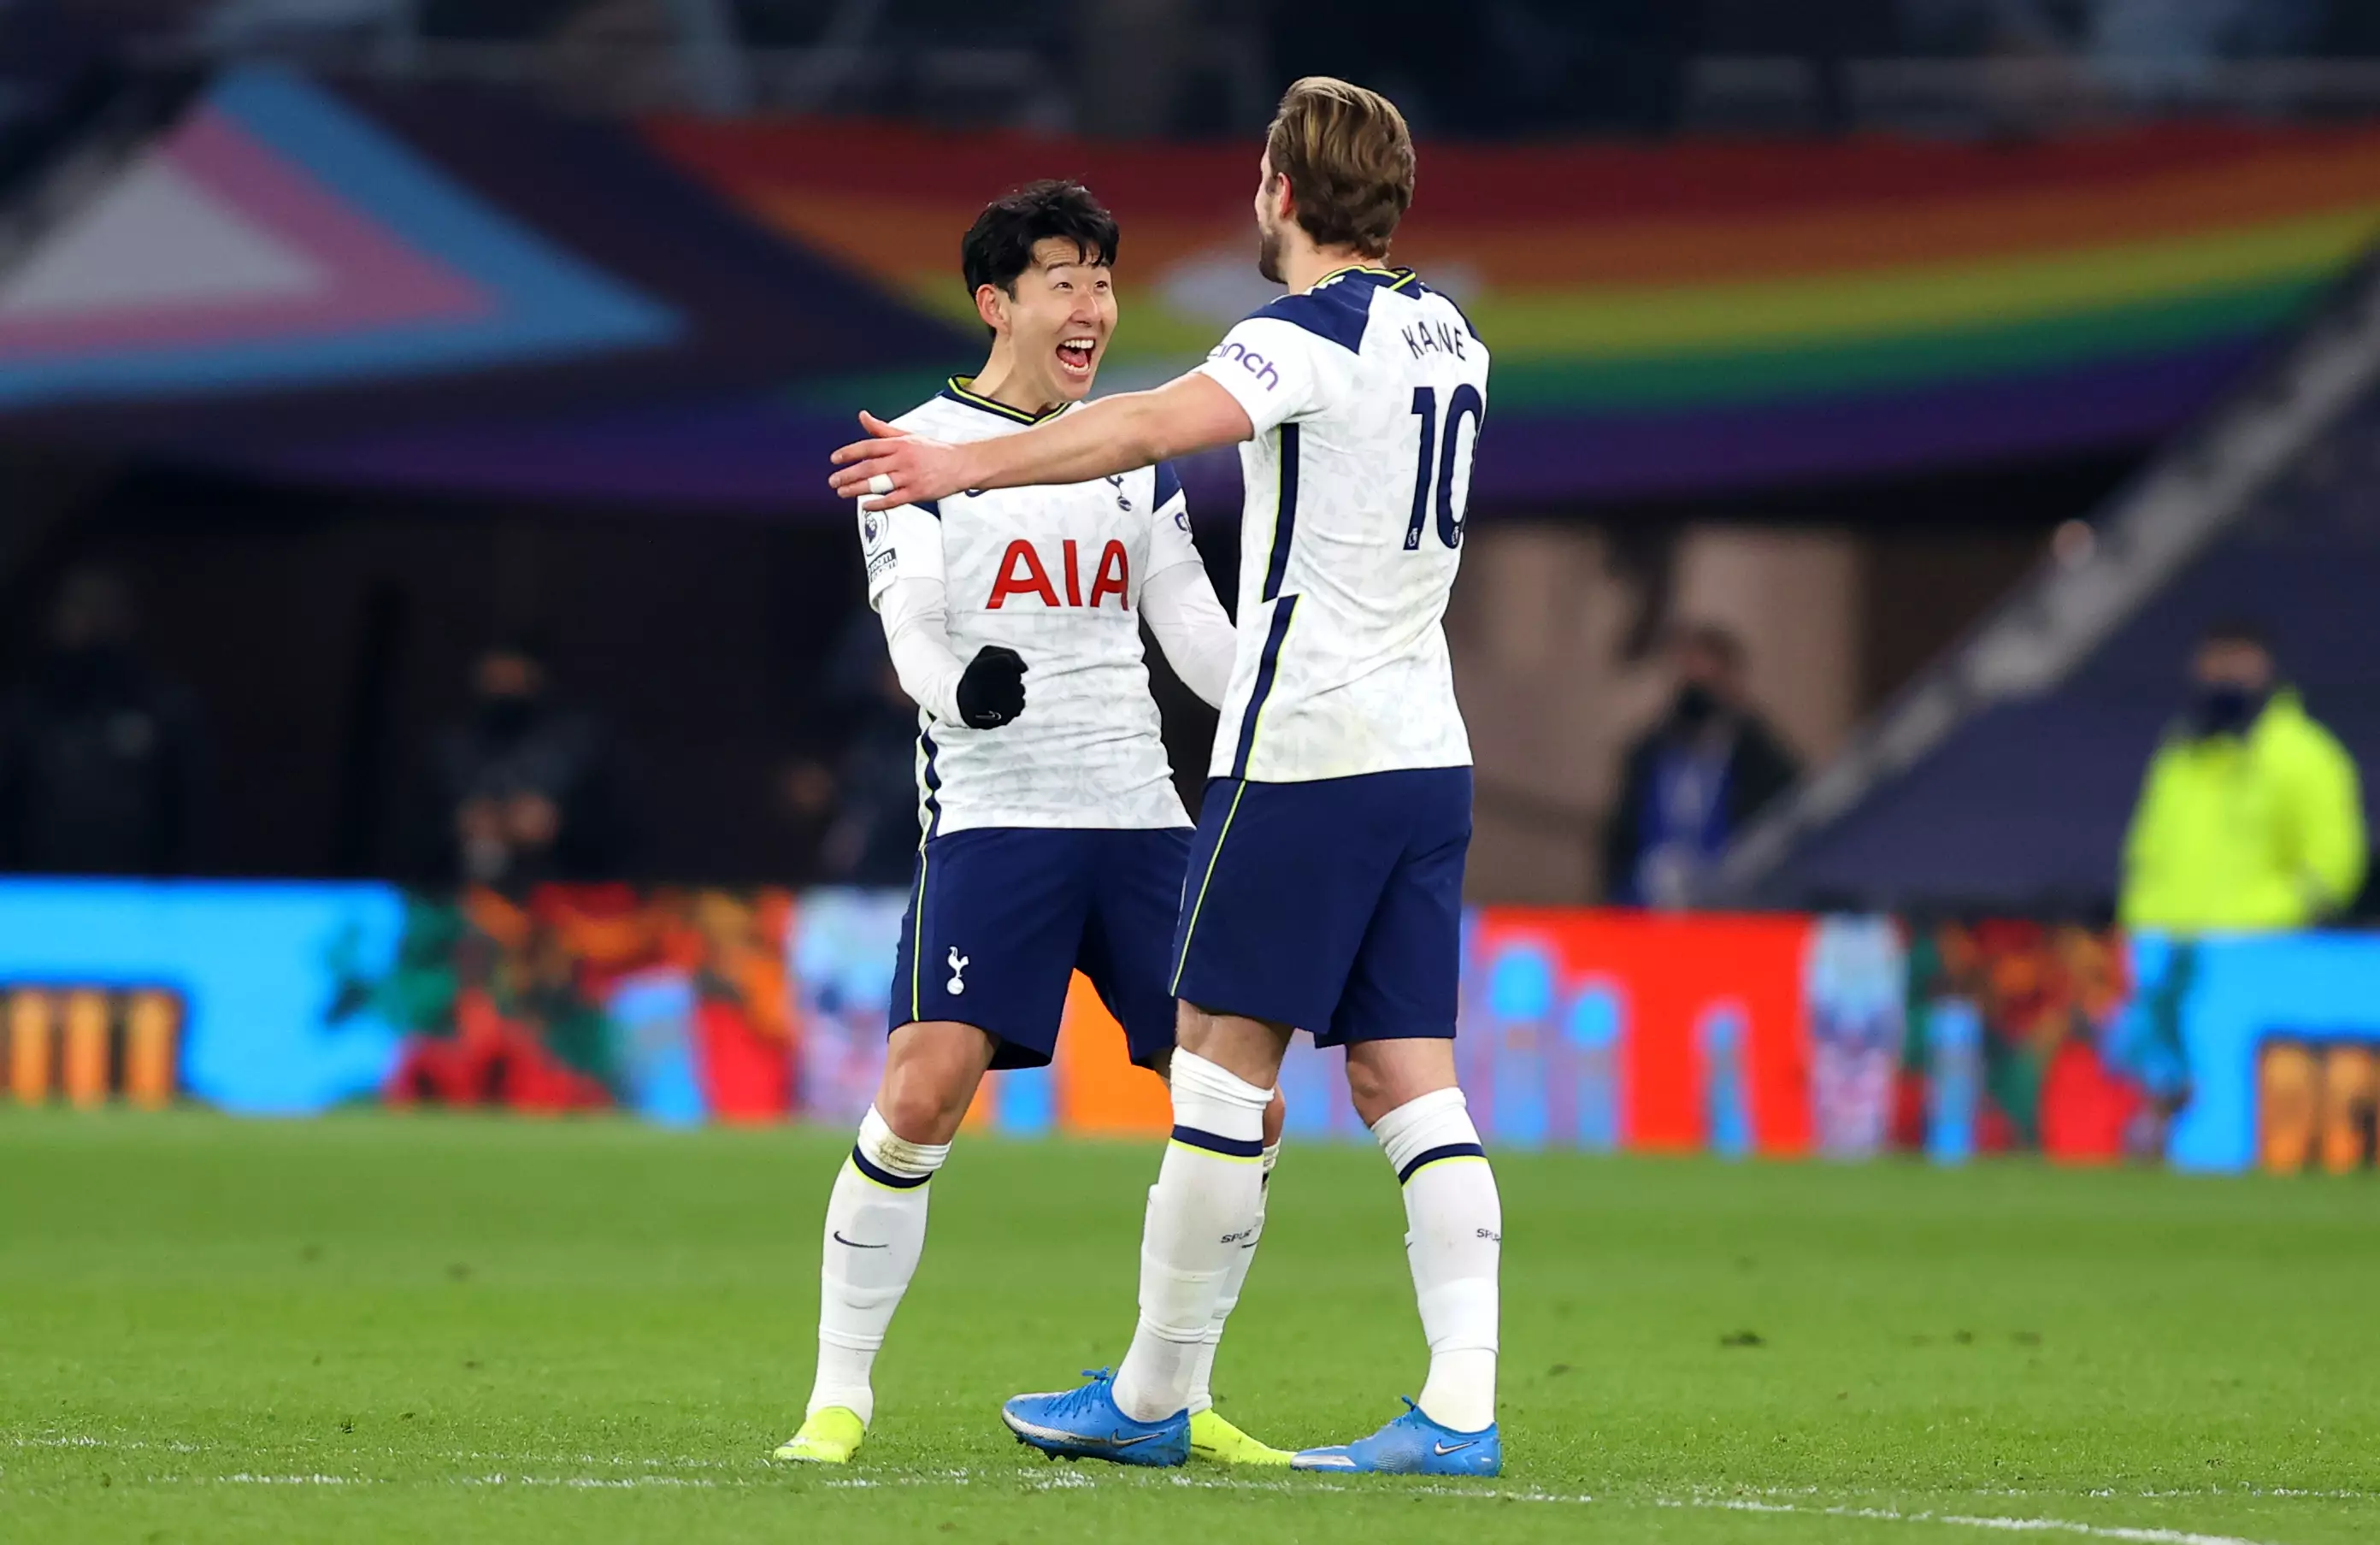 Son Heung-min and Harry Kane are a match made in heaven at Tottenham Hotspur